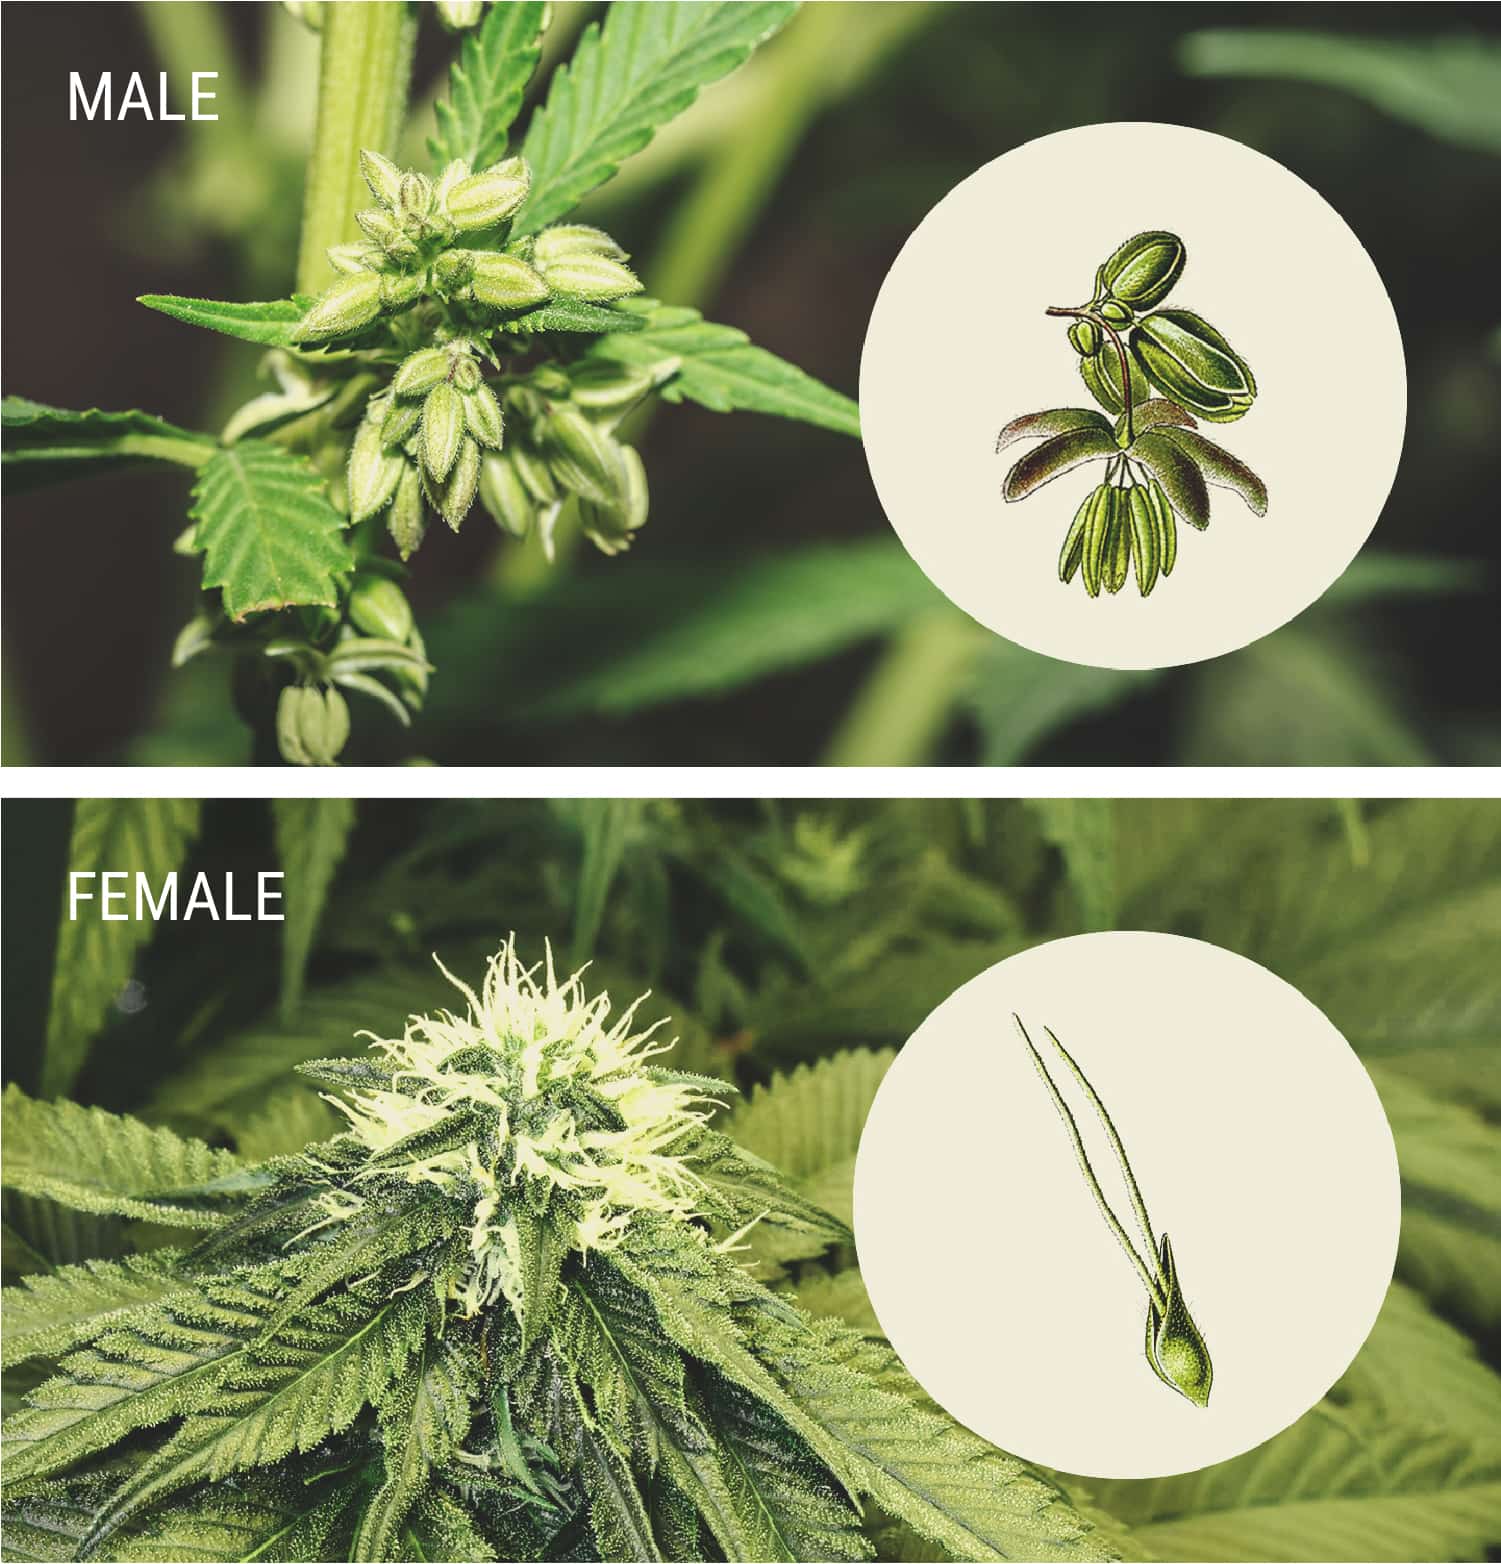 female calyx stages